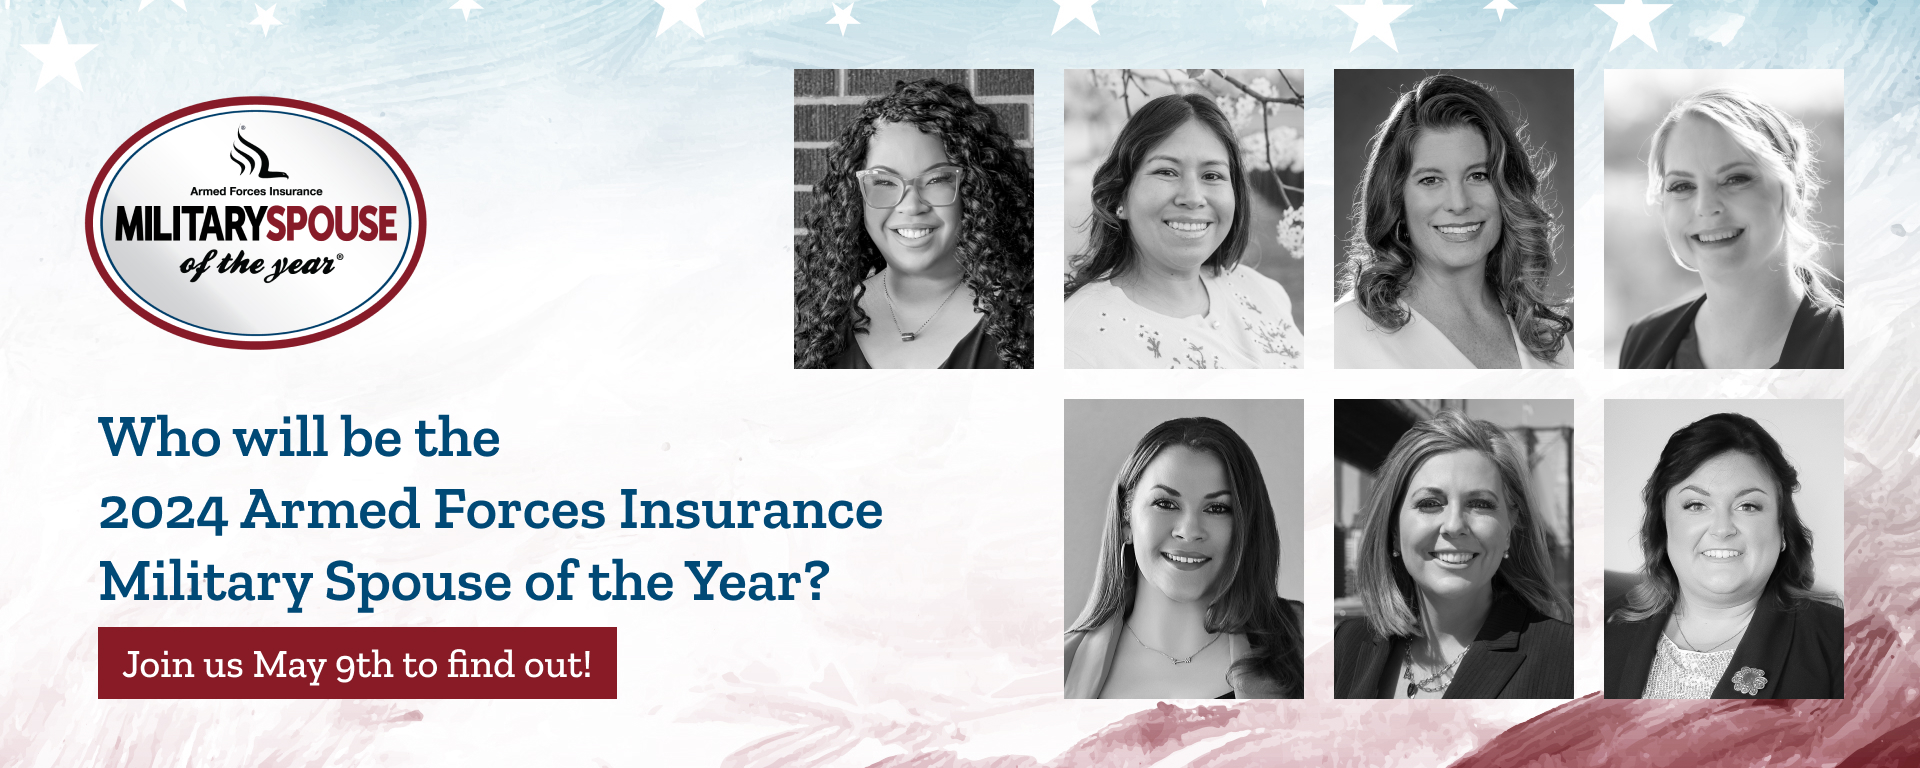 Who will be the 2024 AFI Military Spouse of the Year? Join us May 9th to find out!